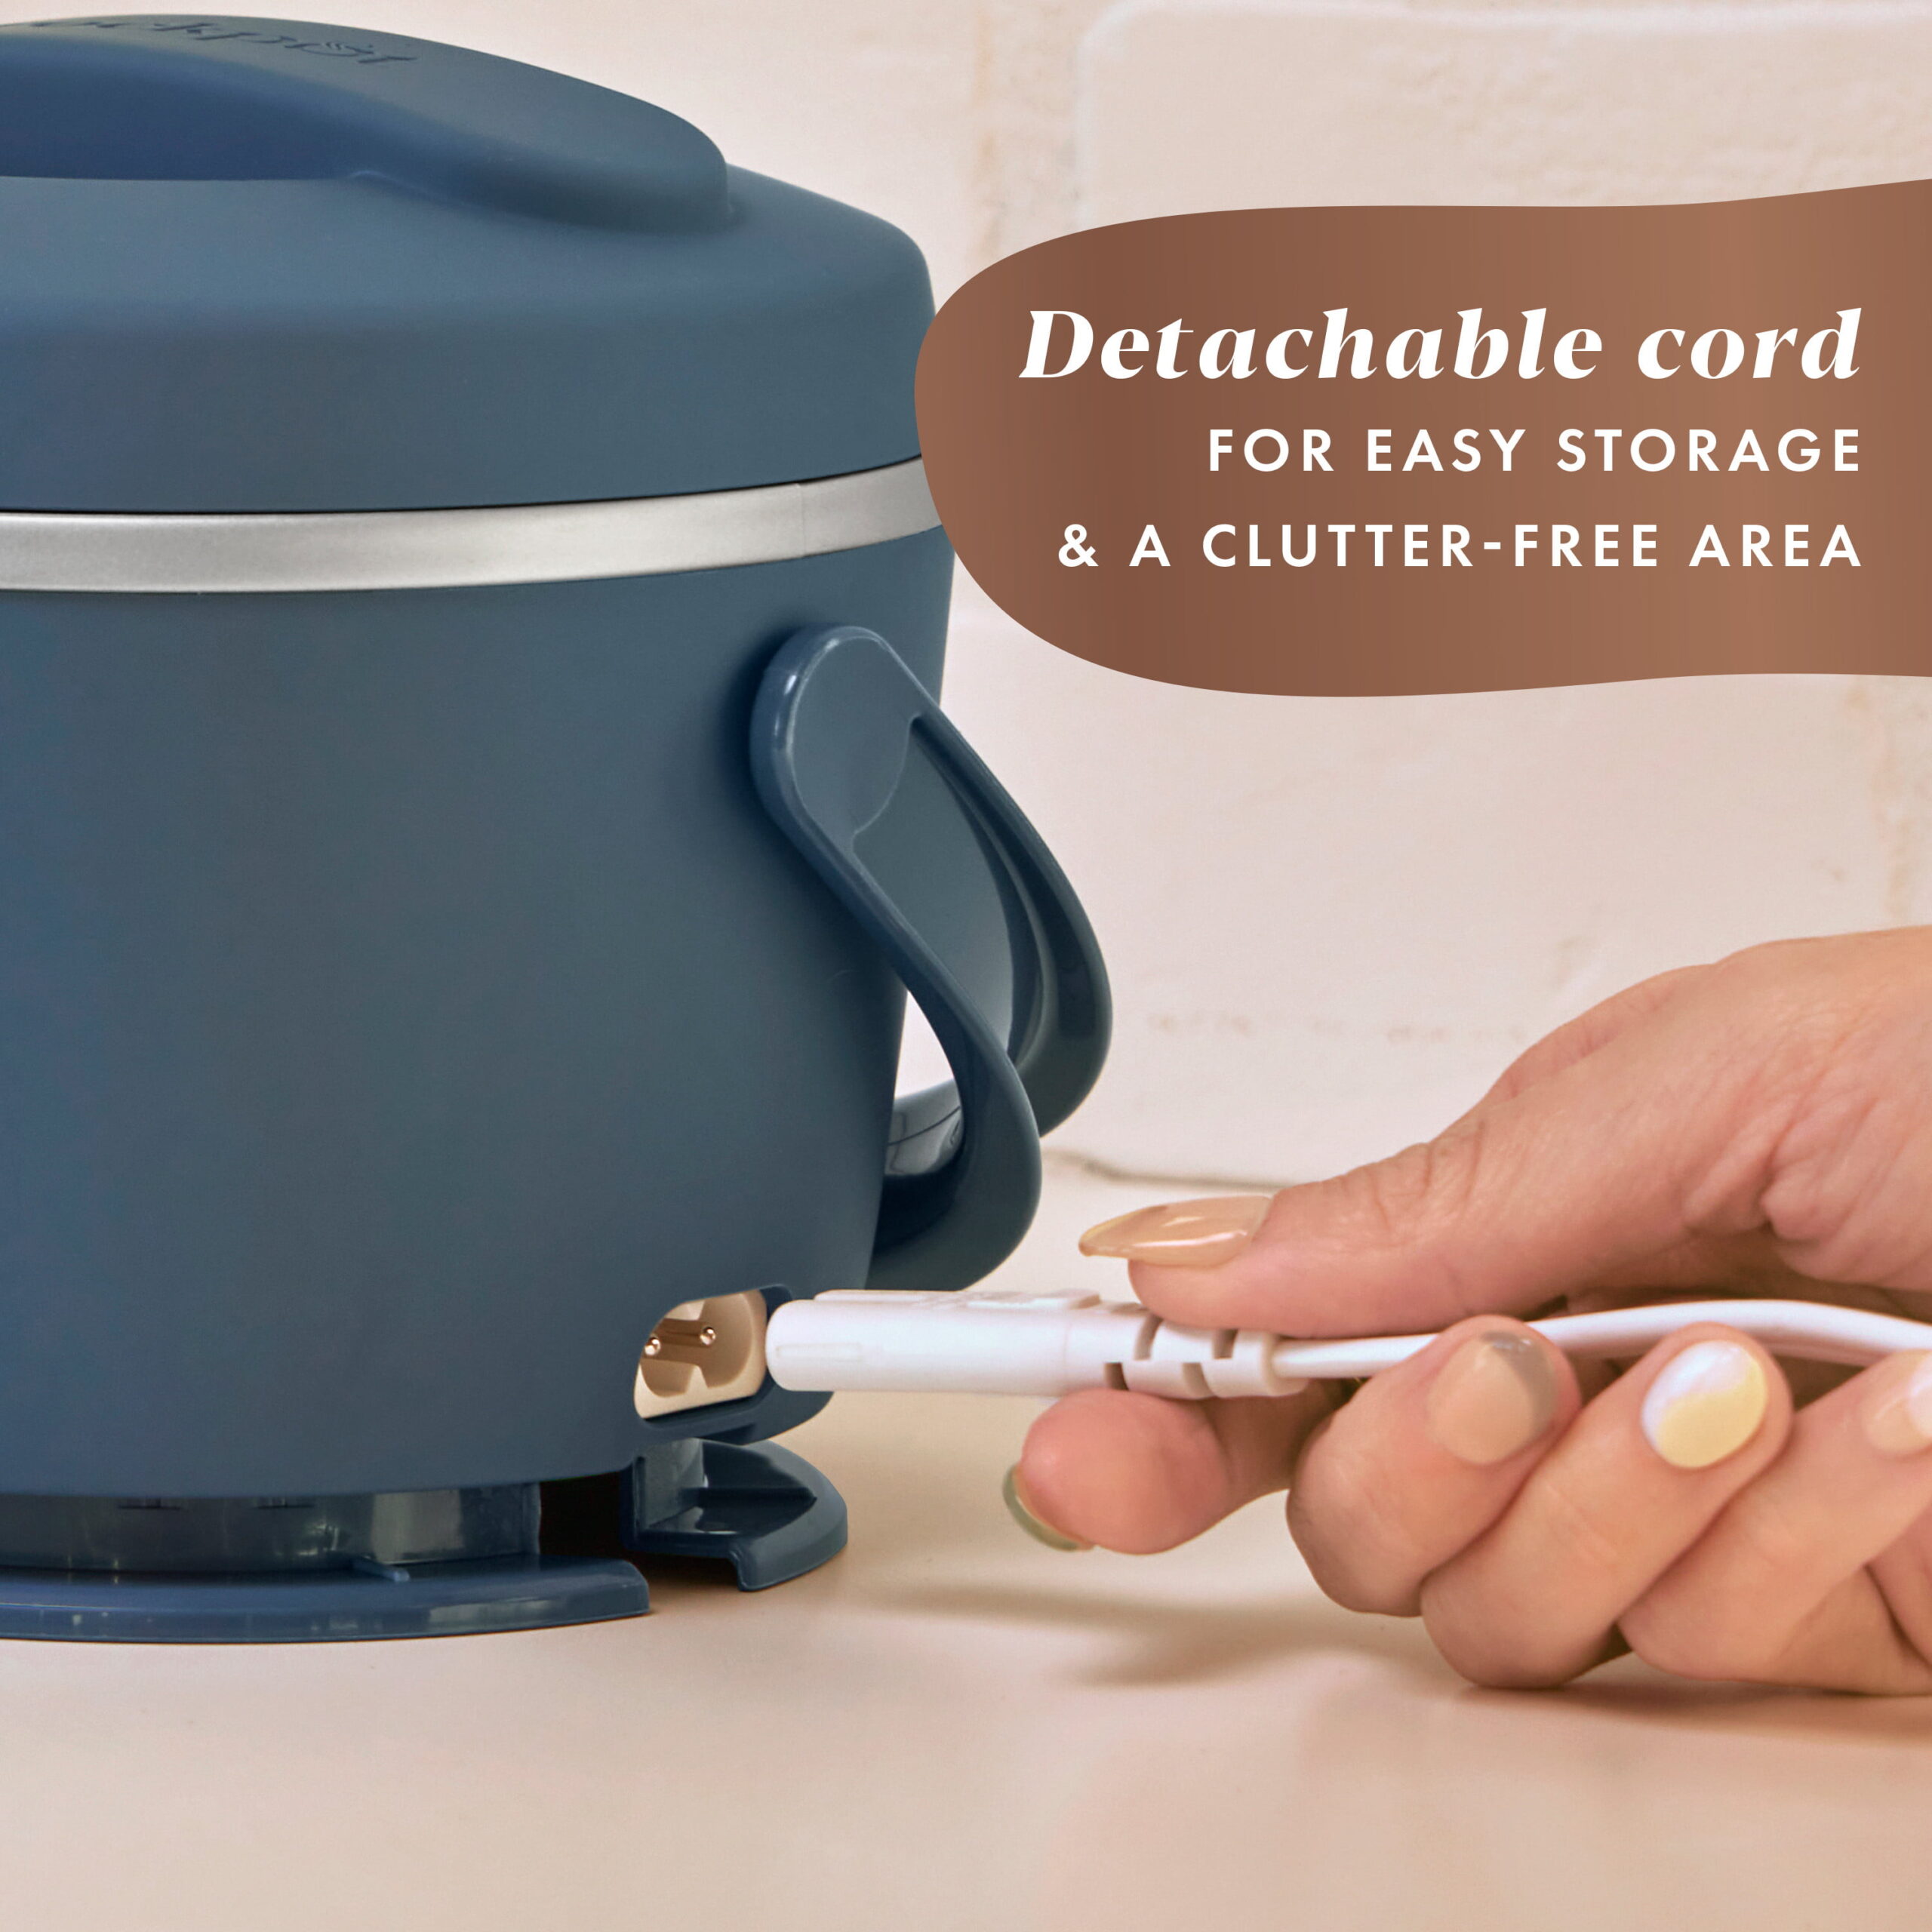 38% Off Crockpot Electric Lunch Box, Portable Food Warmer for On